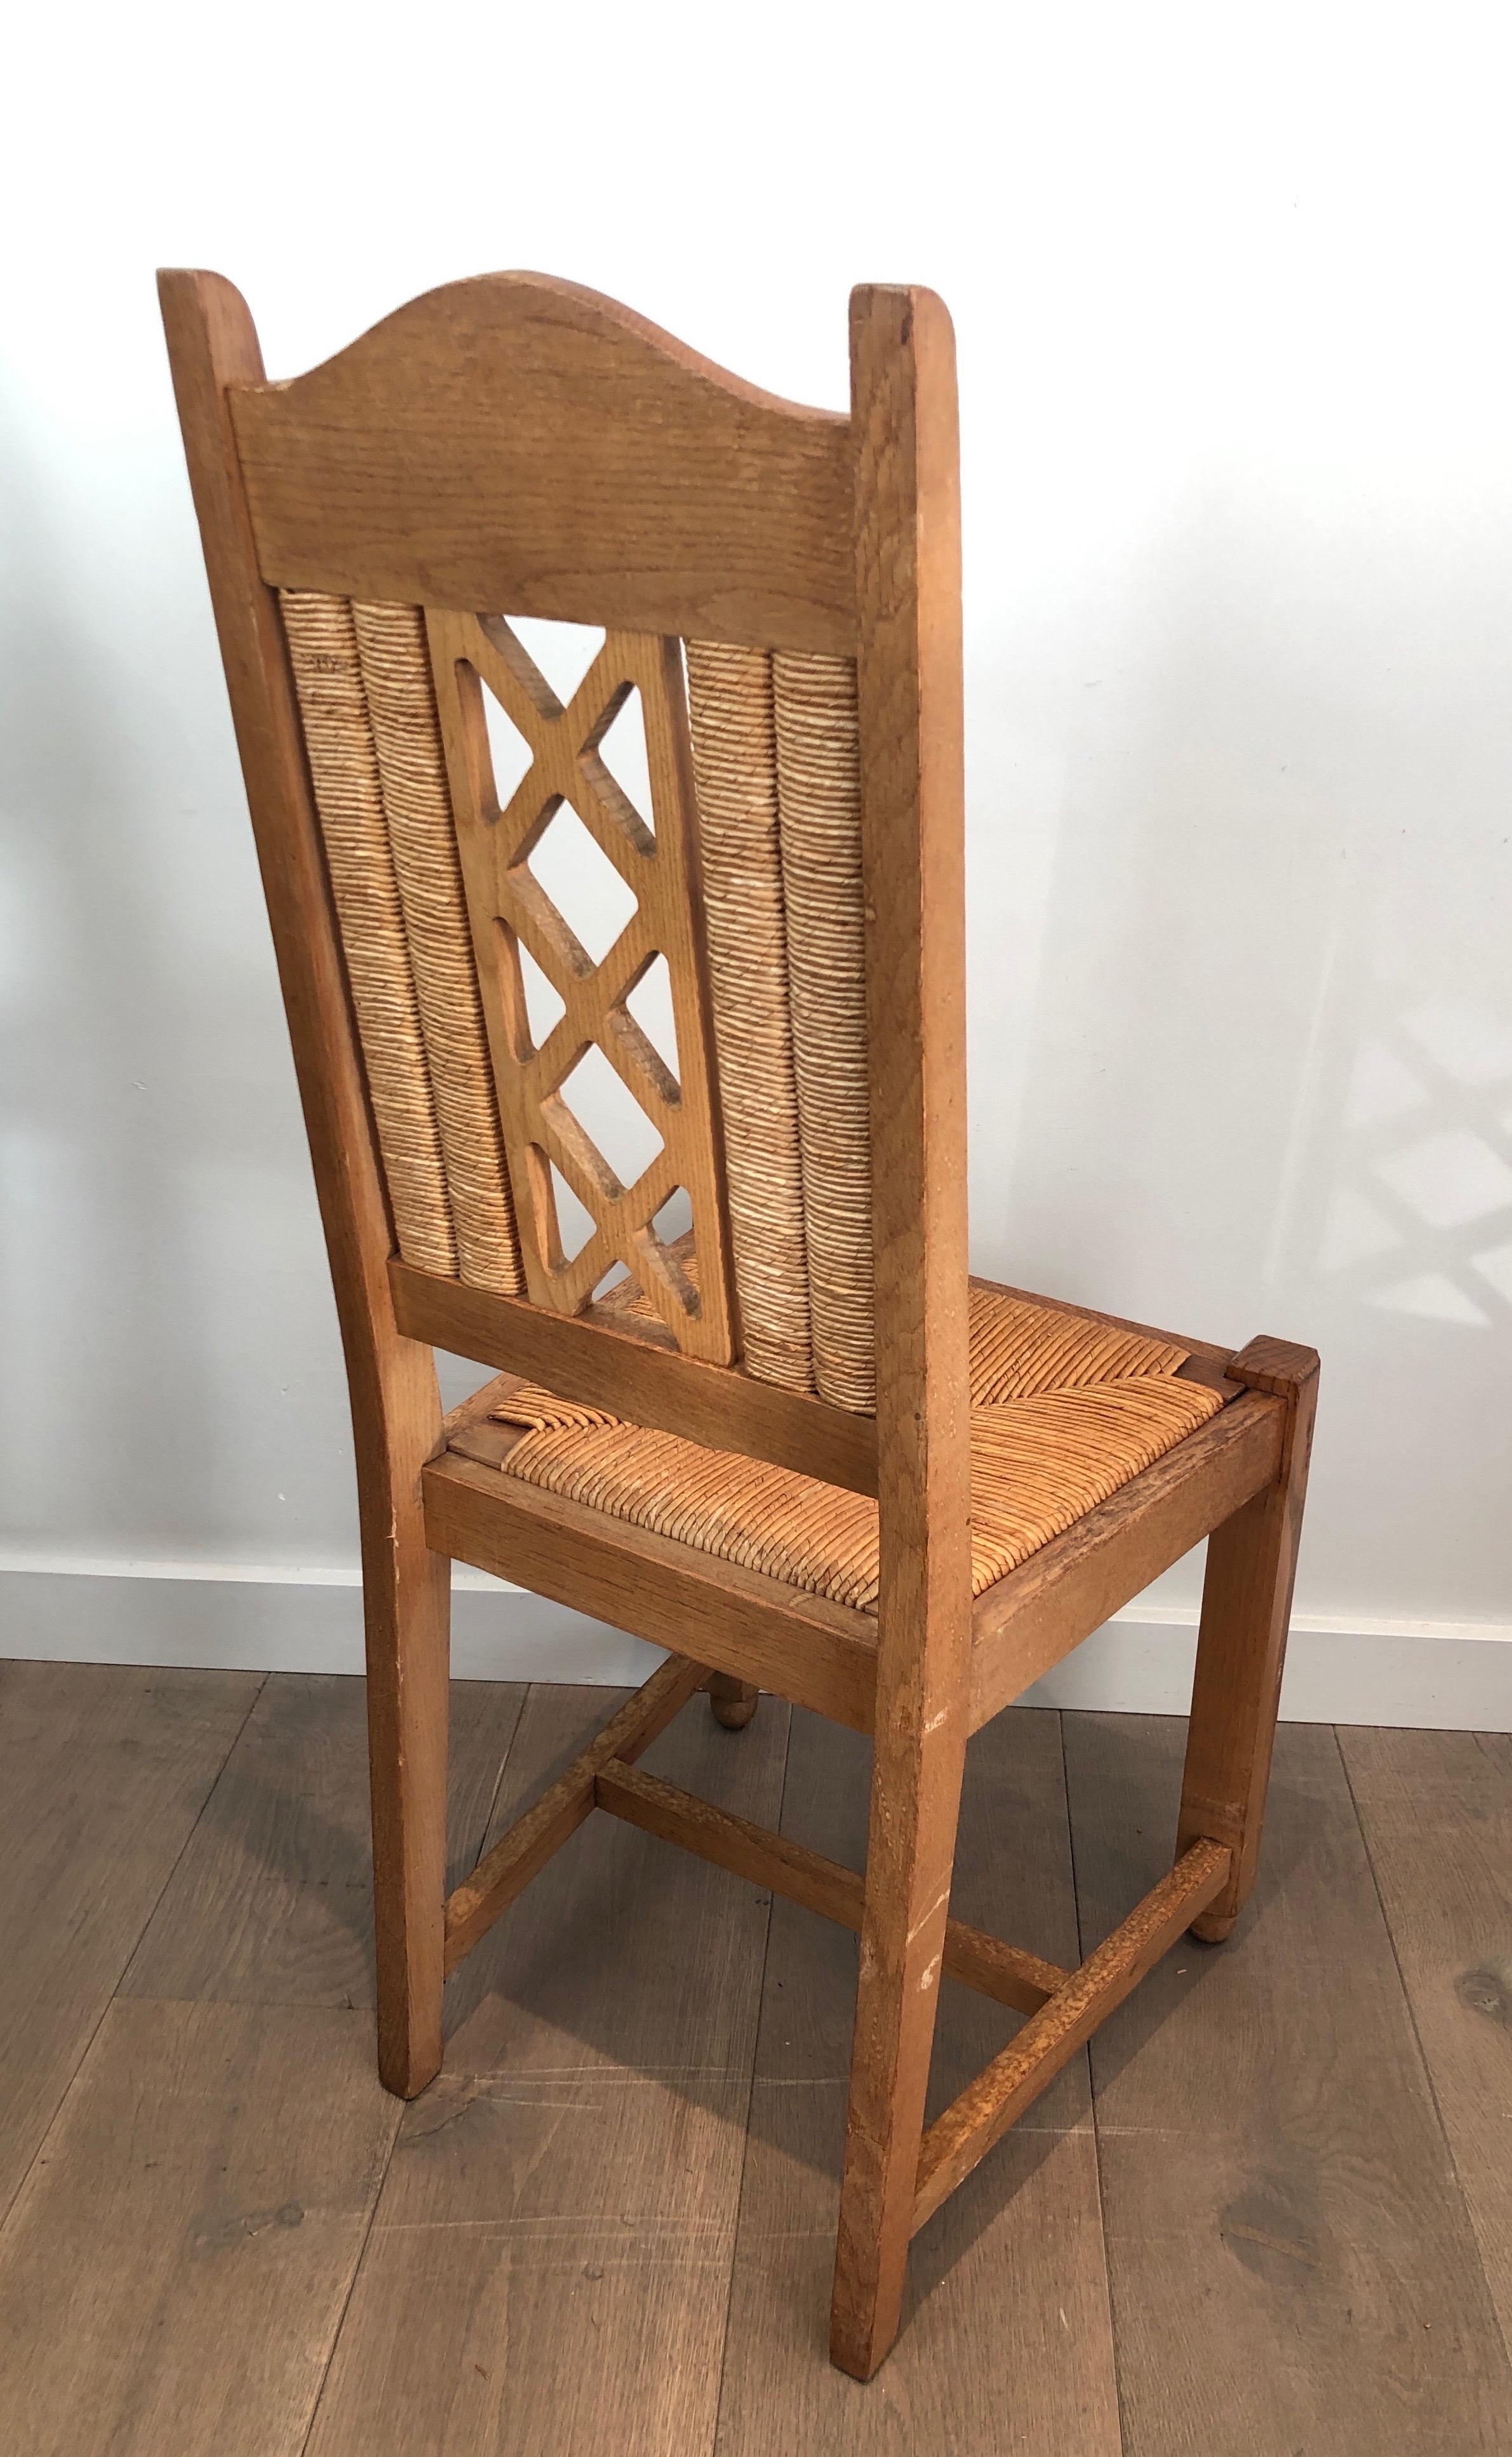 Set of 6 Brutalist Chairs Made of Ash and Straw, French Work, Circa 1950 For Sale 5